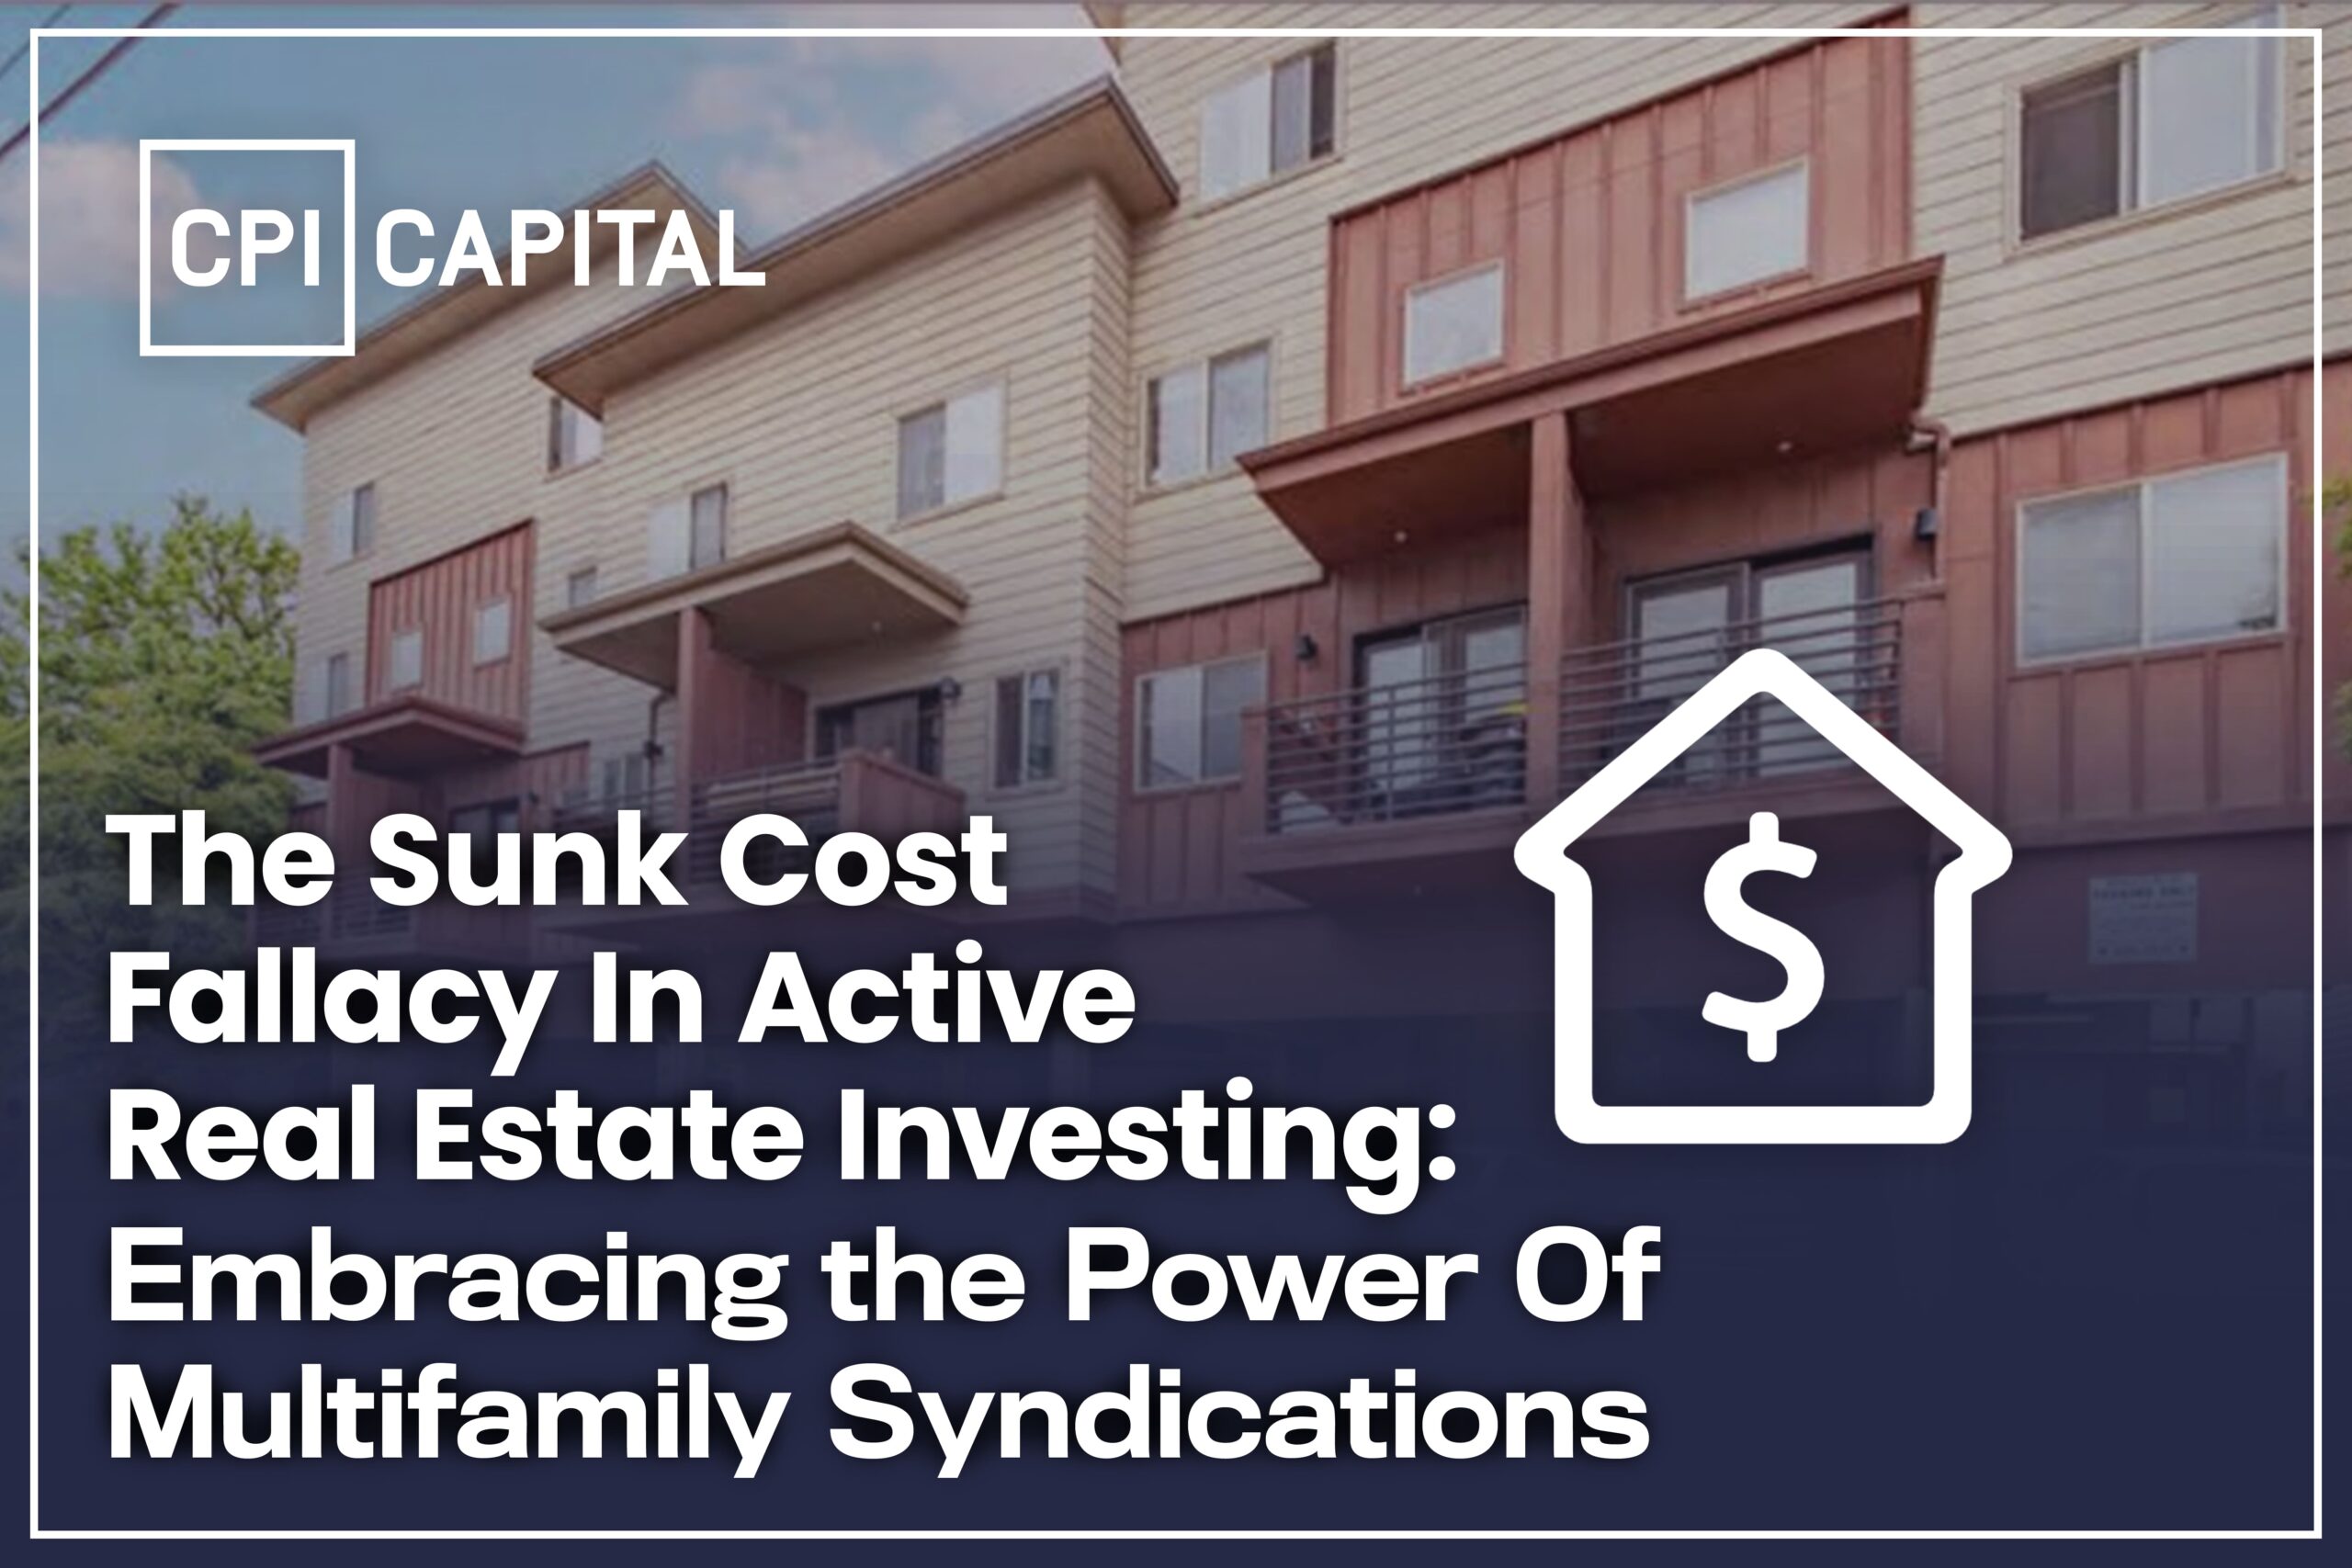 The Sunk Cost Fallacy In Active Real Estate Investing: Embracing The Power of Multifamily Syndications